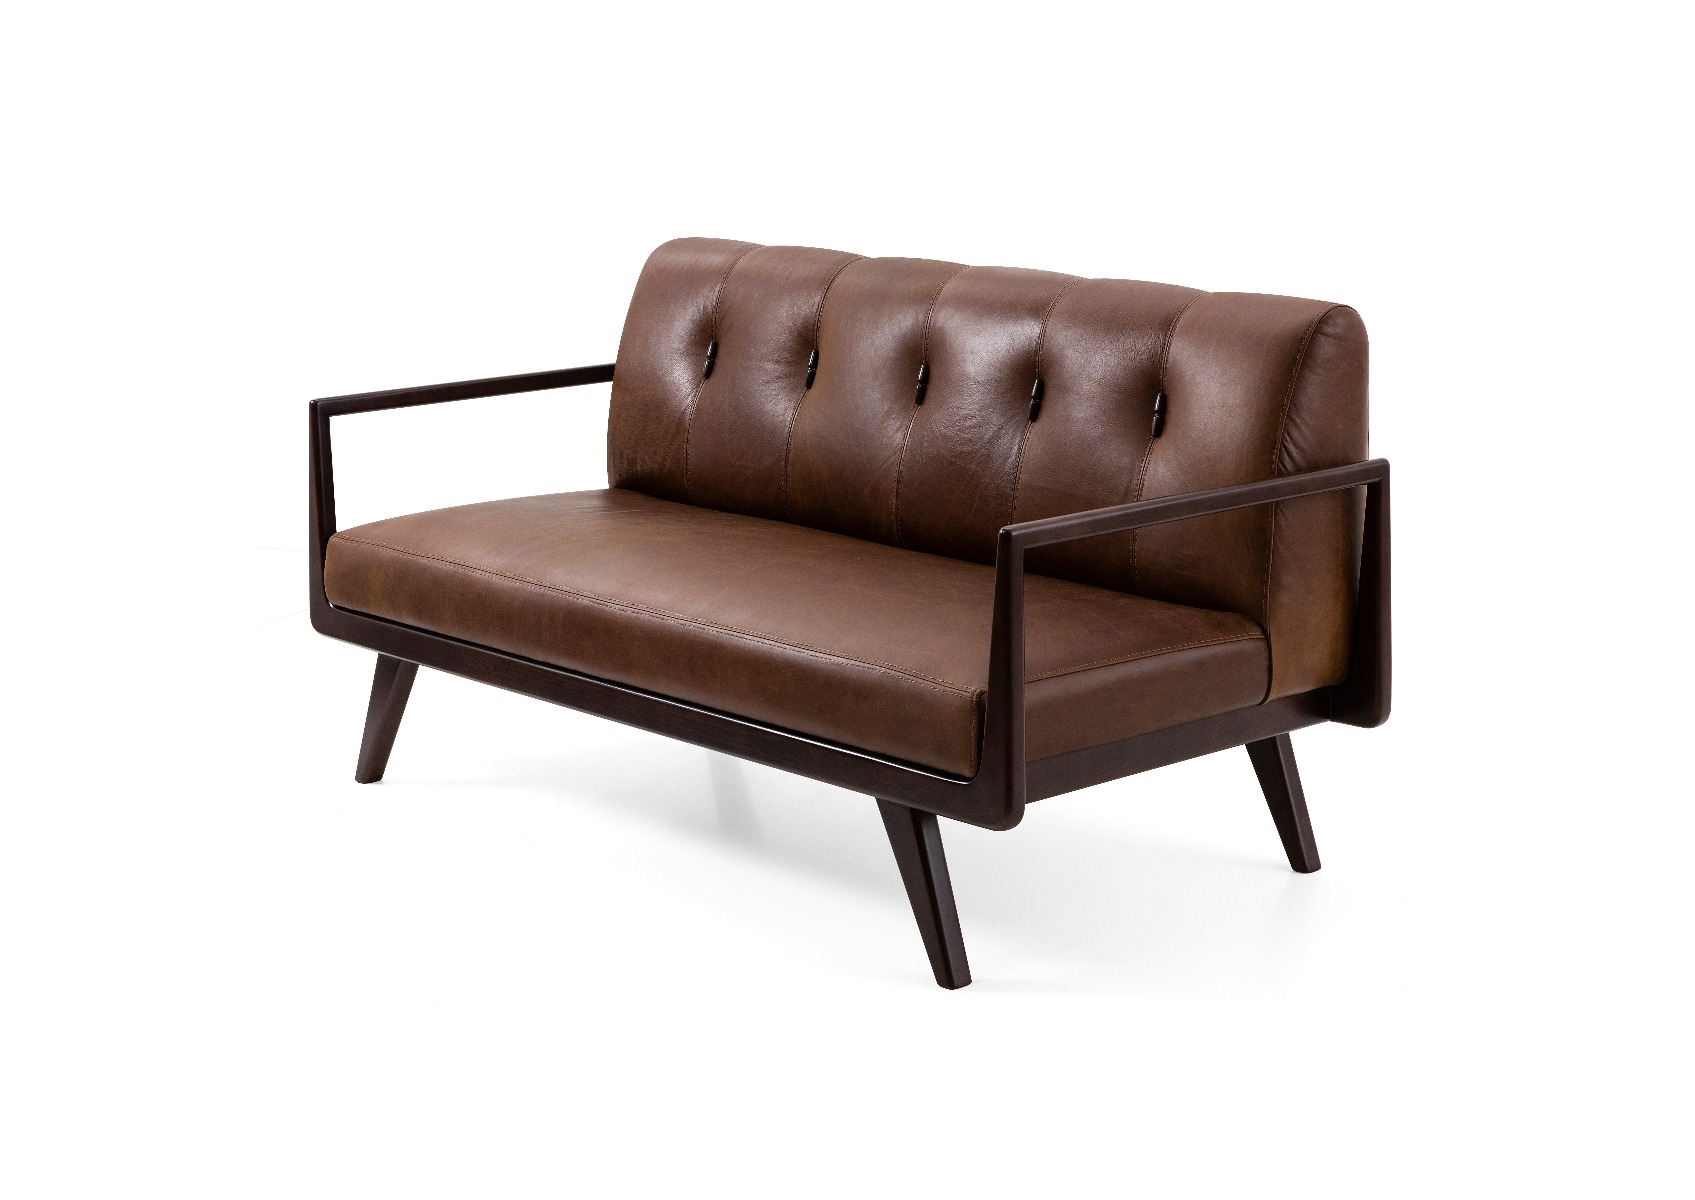 Luxury Capitol brown sofa living room furniture by Luxuria London